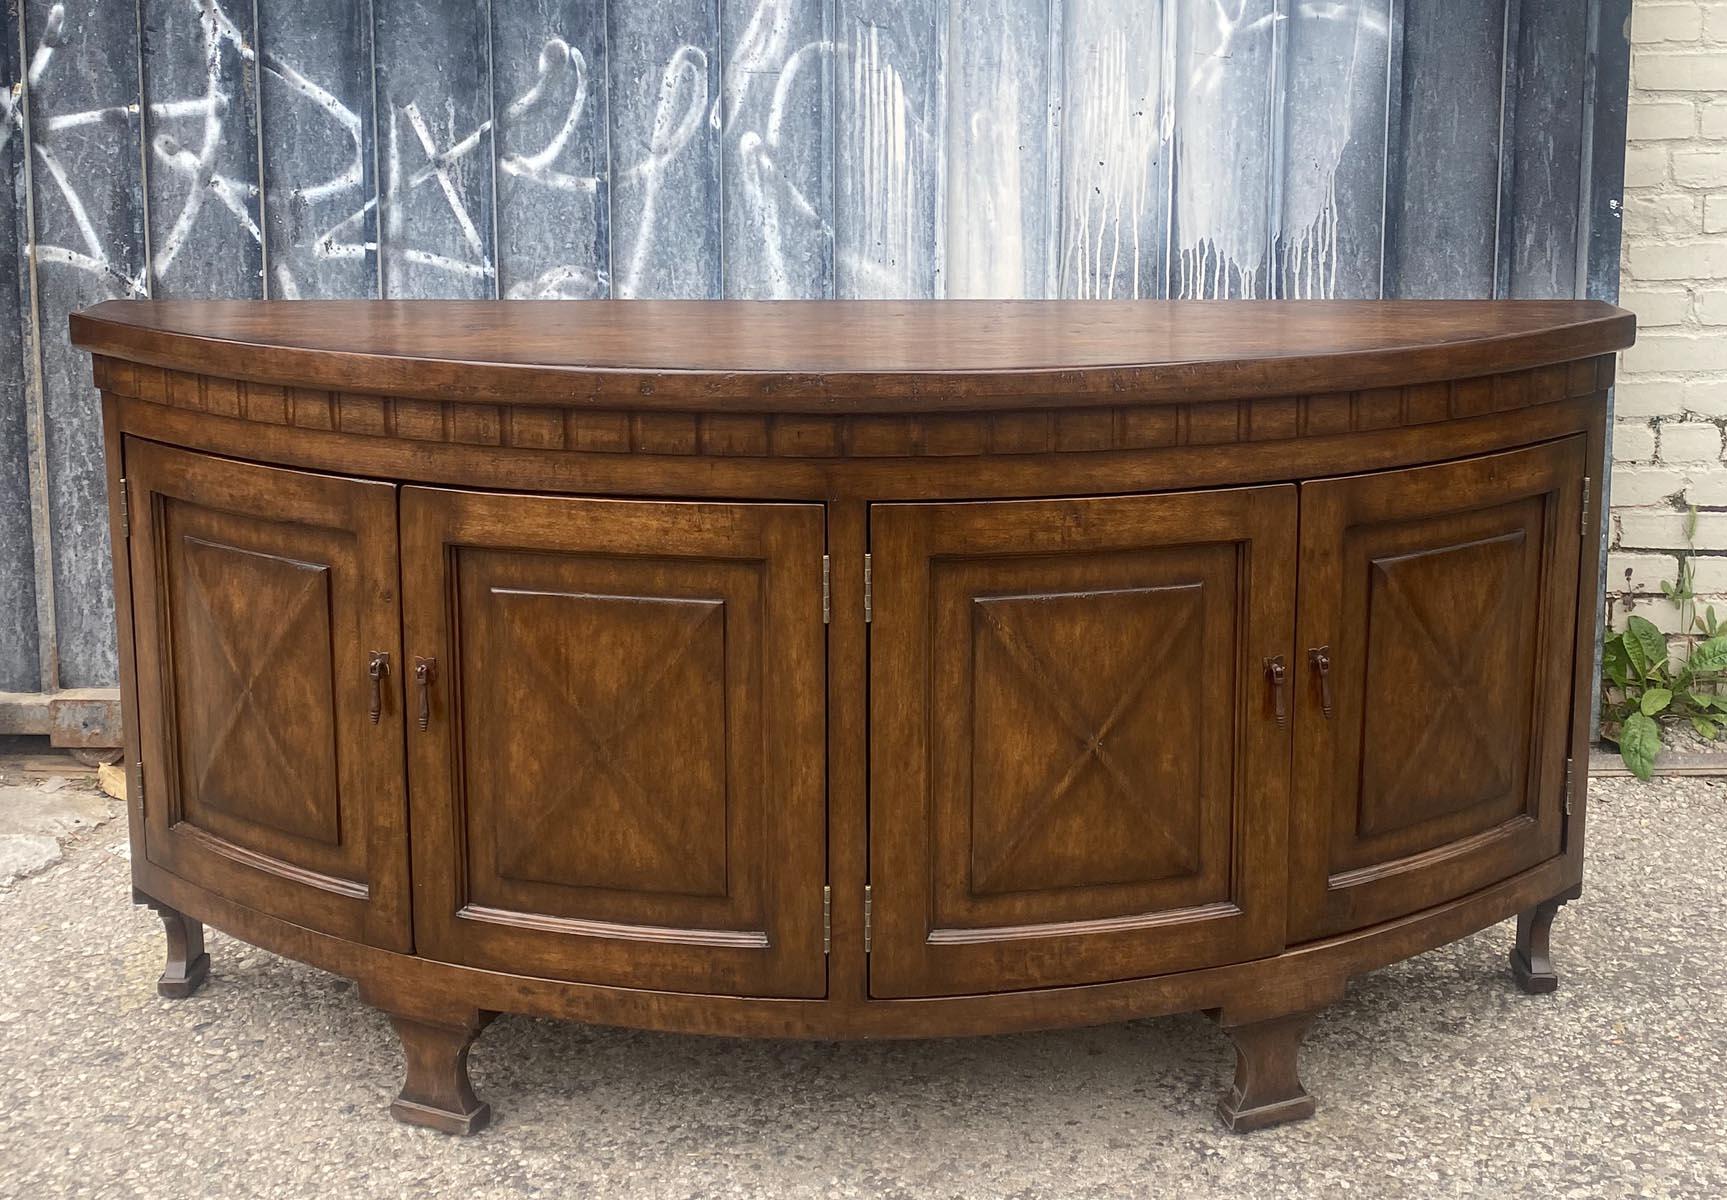 This is our custom Demi Lune cabinet. As shown20150 in walnut, with a custom, medium distressed finish. Can be made in any size and finish. All our custom pieces are bench made and hand finished in Los Angeles,
Please inquiry for pricing as it is